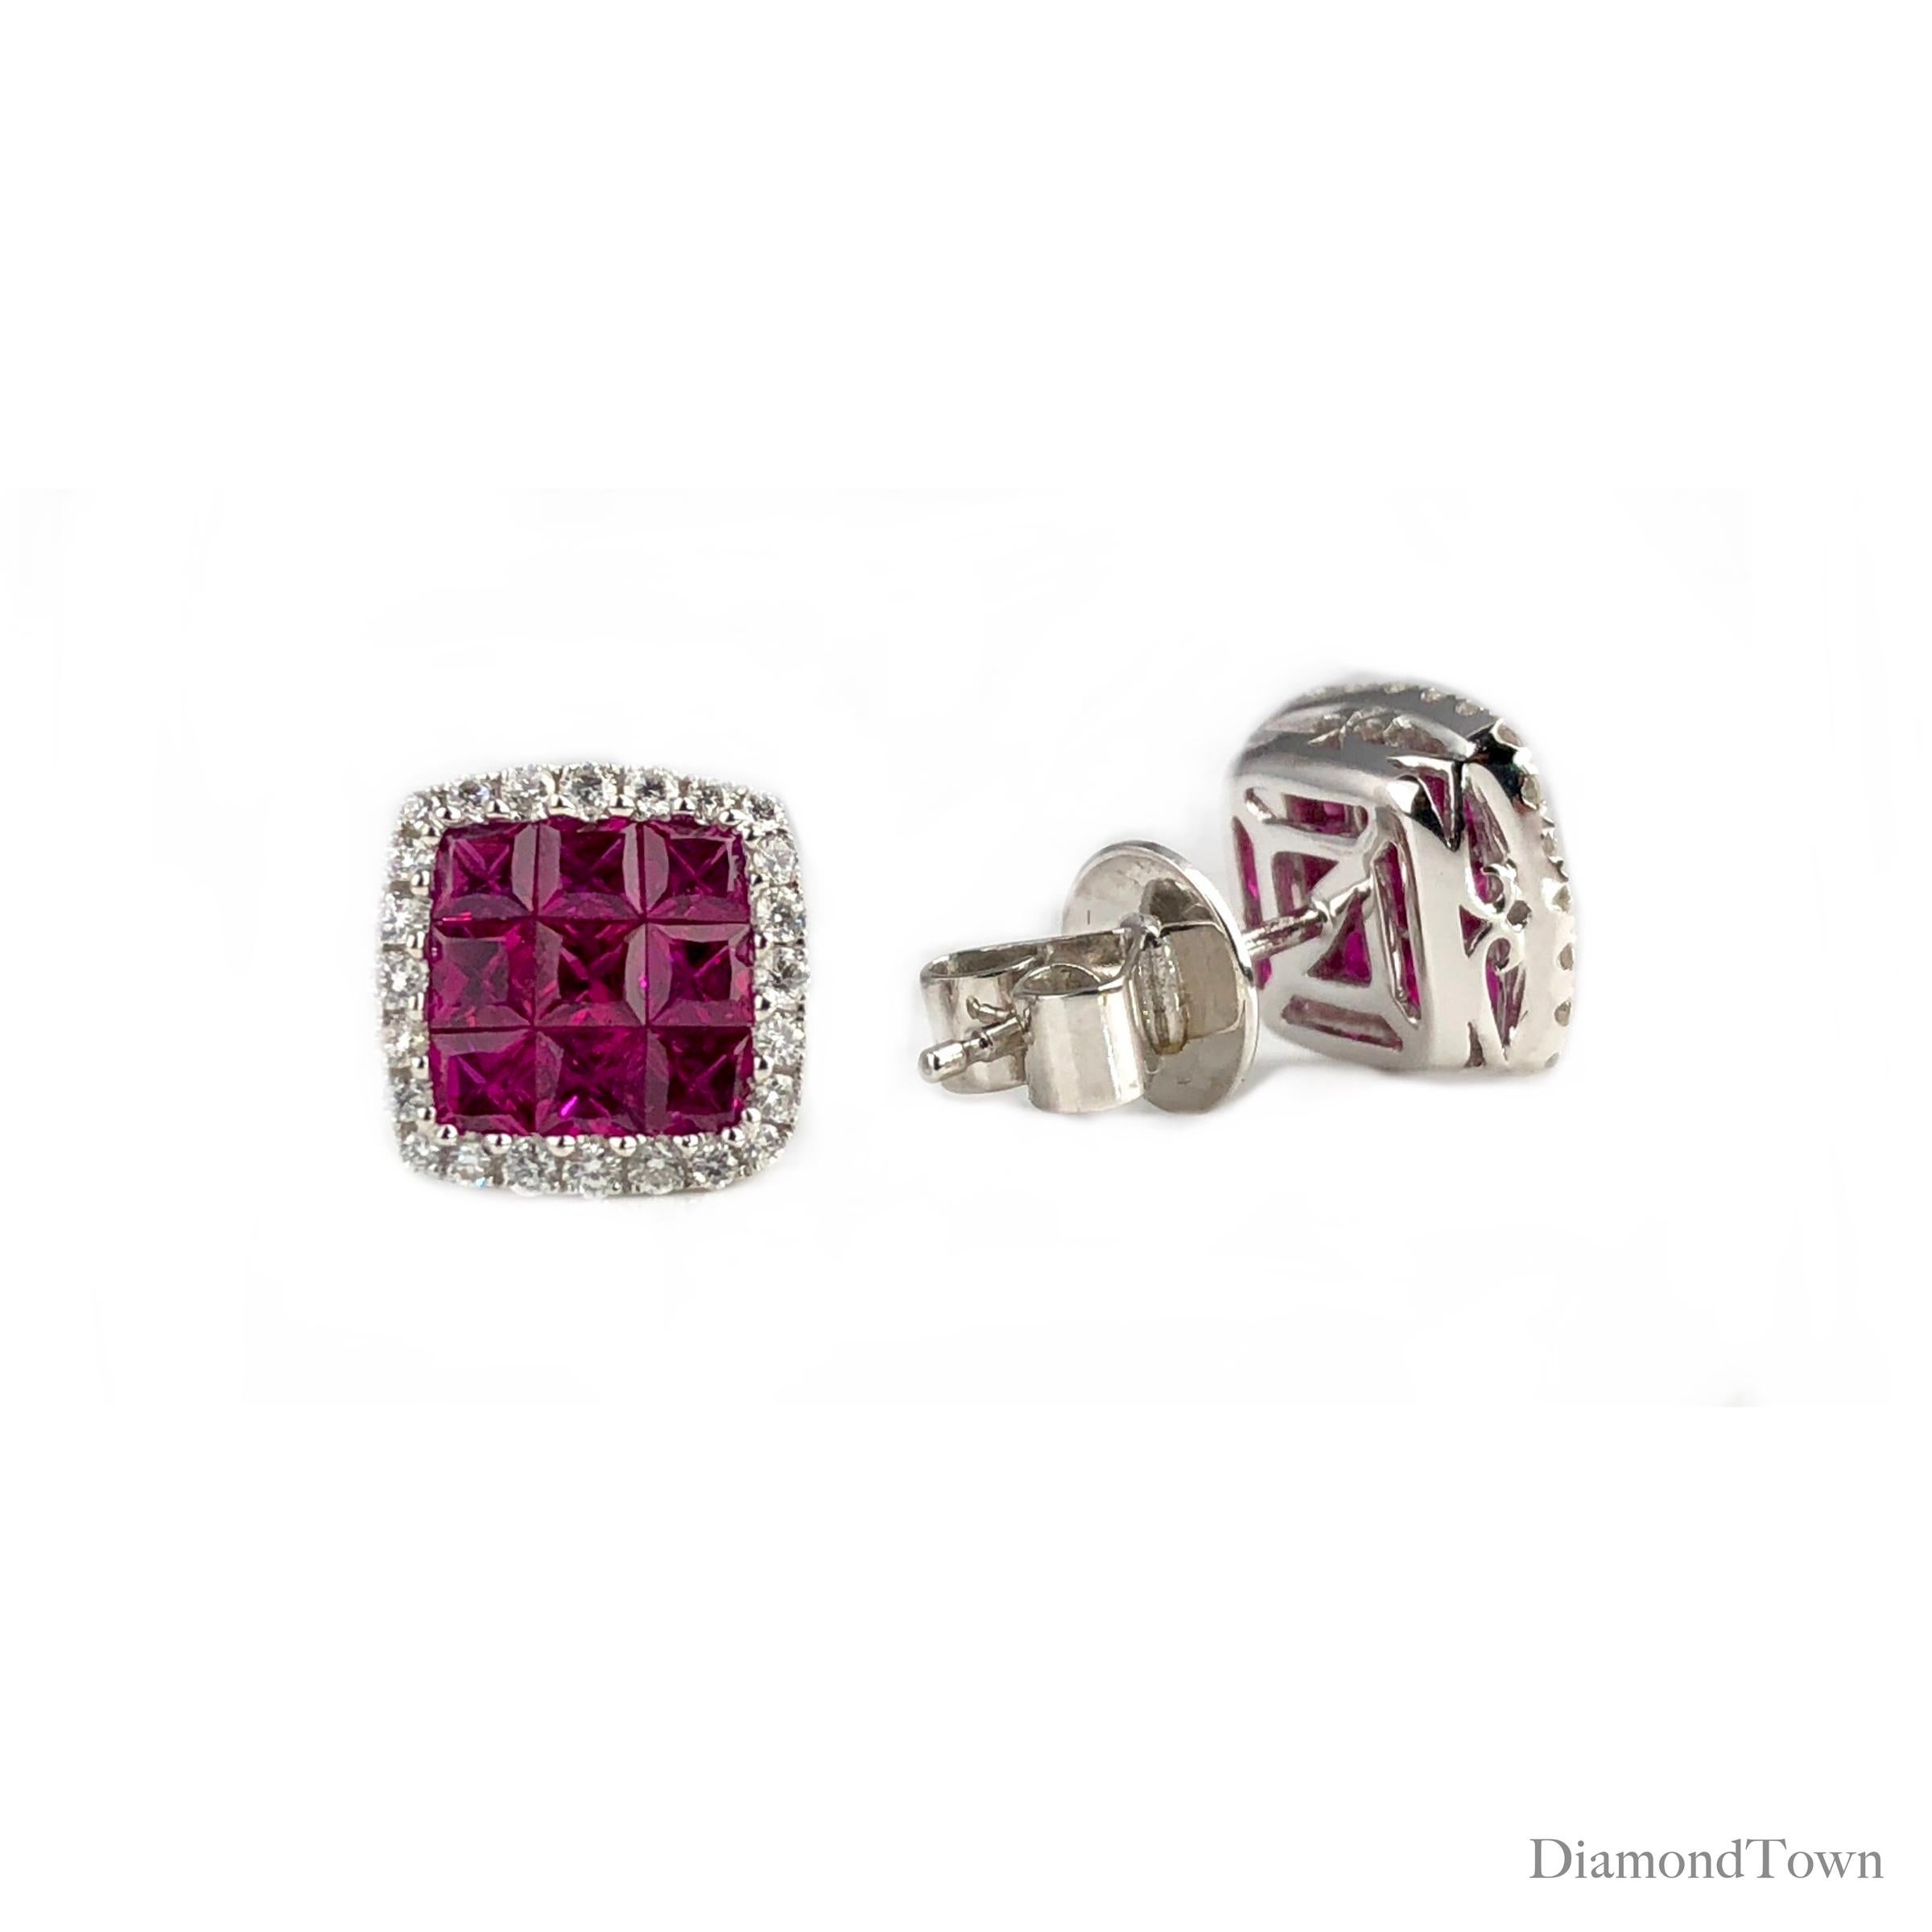 DiamondTown final discount pricing. Sale ends January 14, 2019.

These stud earrings feature a ruby square cluster center (nine stones each earring, total weight 1.50 carats), surrounded by a halo of white diamonds (total diamond weight 0.29 carats)